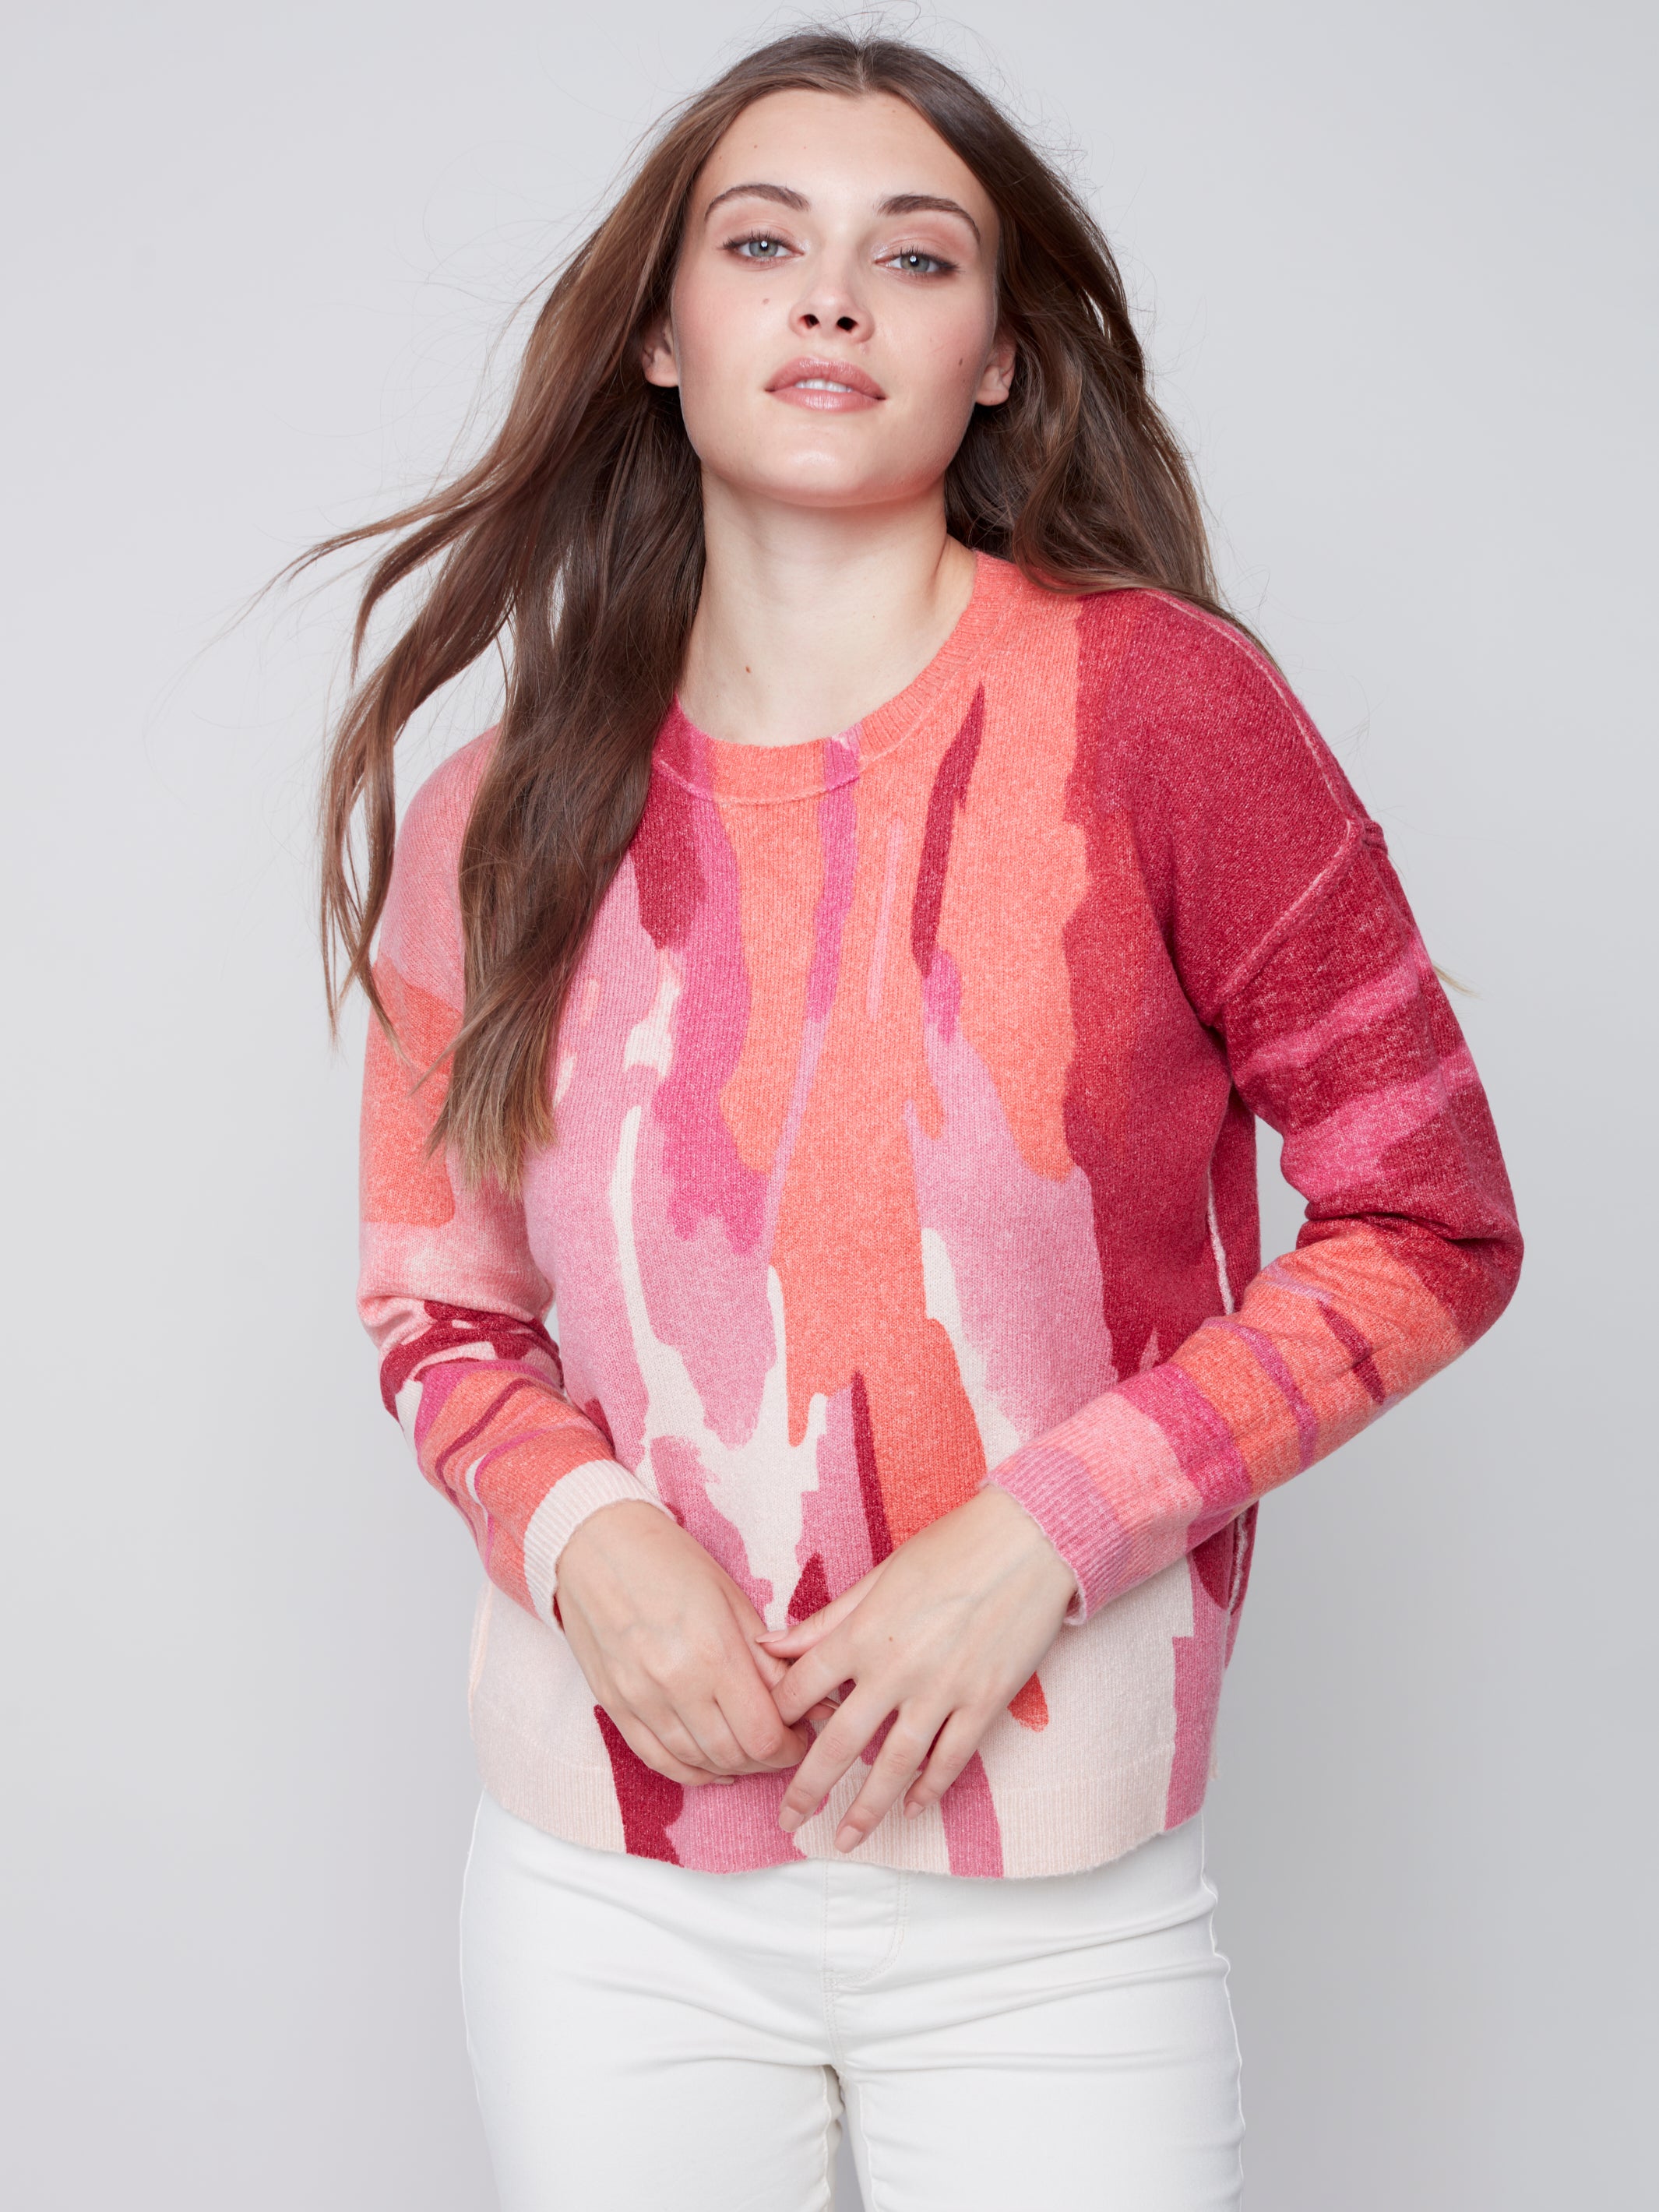 Reversible Crew Neck Sweater by Charlie B